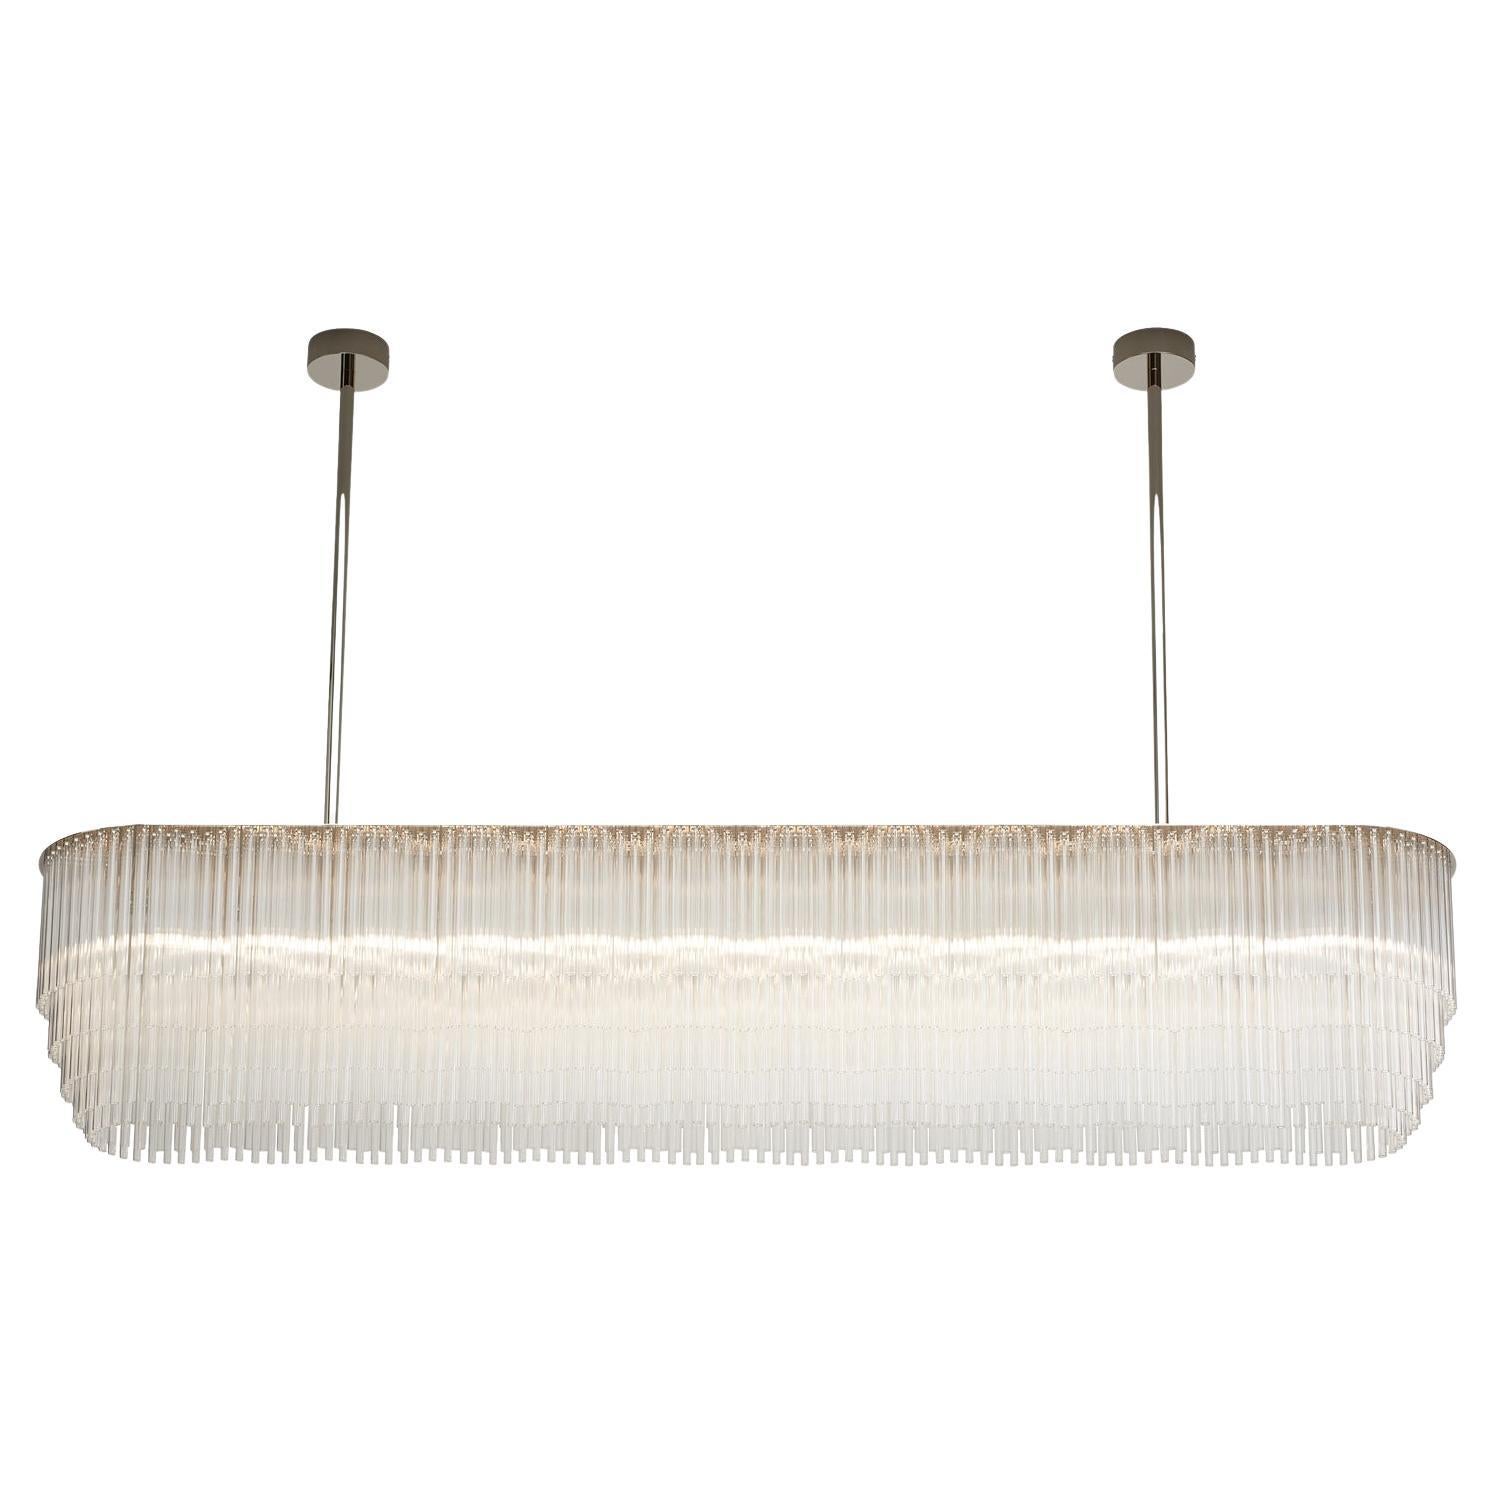 Linear Chandelier 1370mm / 54" in Polished Nickel with Tiered Glass Profile For Sale